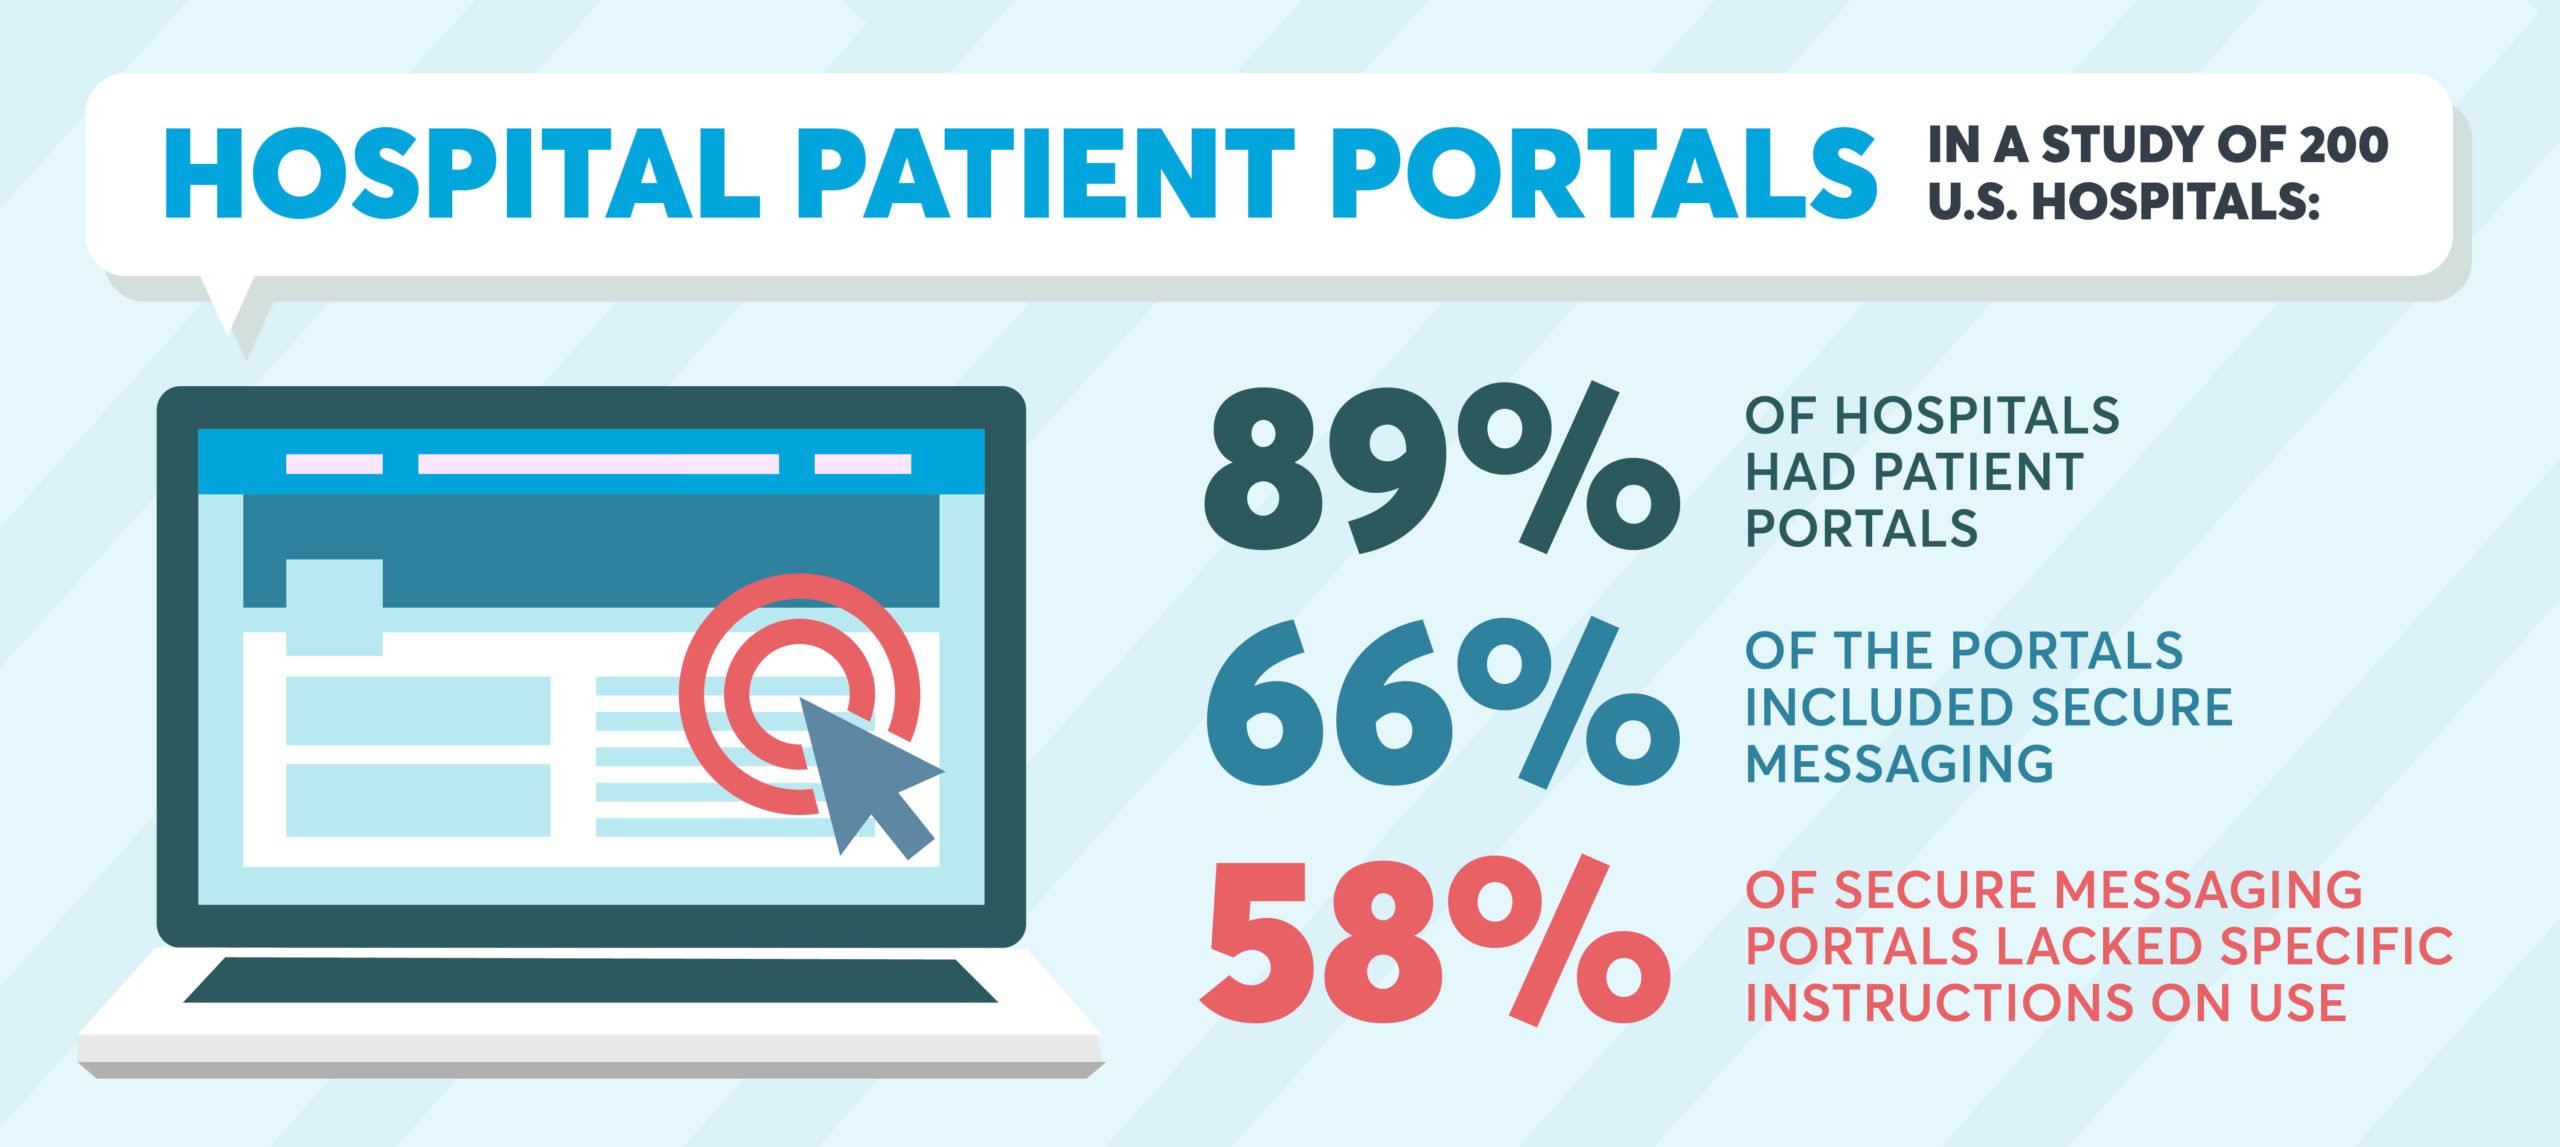 Hospital patient portals lack specific and informative guidance for